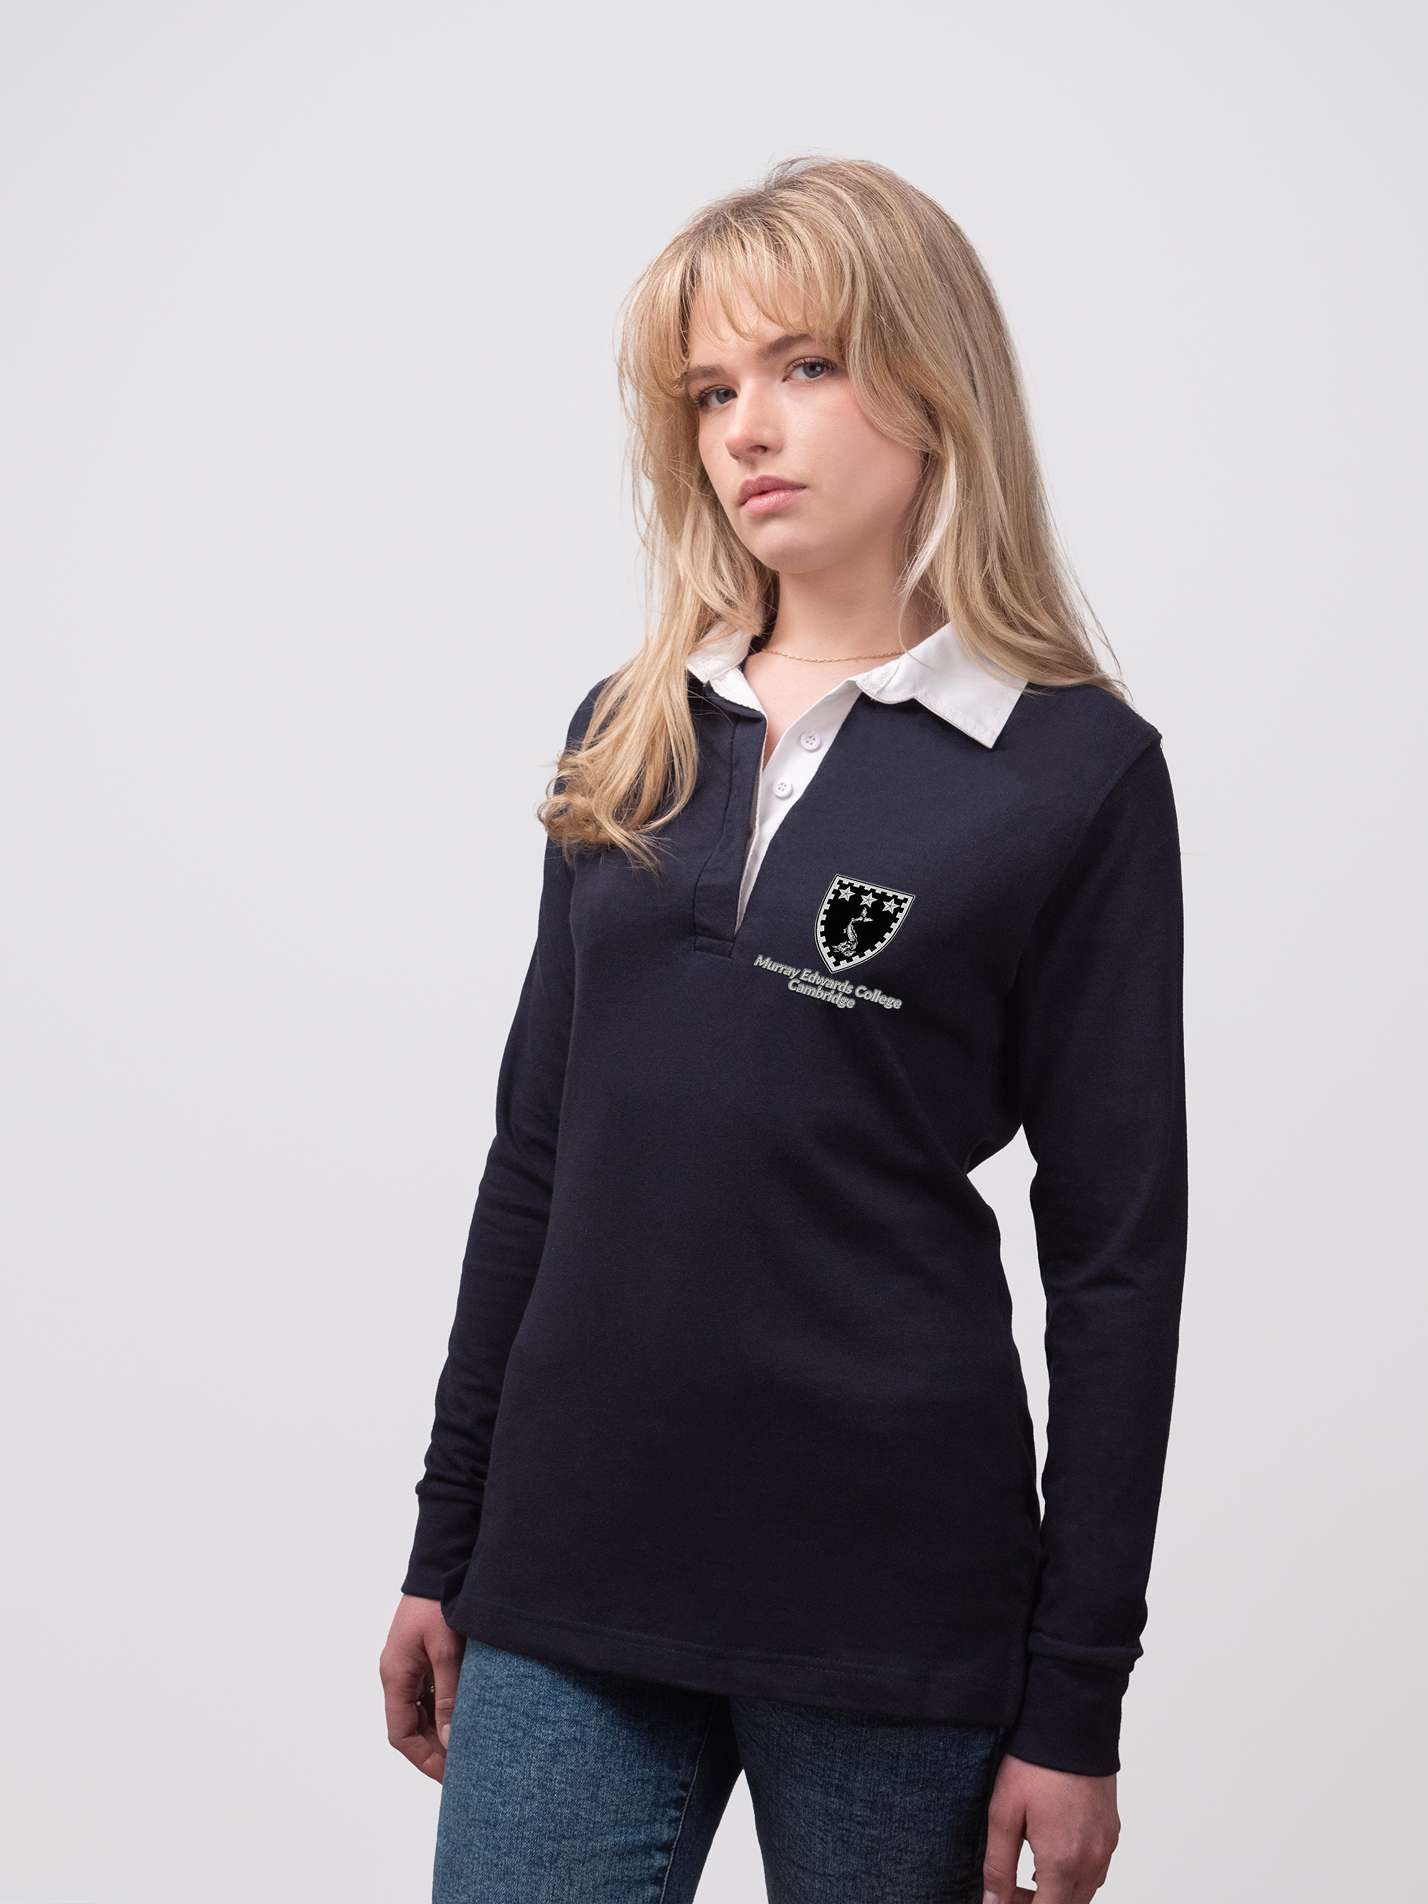 Student wearing a navy Murray Edwards College rugby shirt with embroidered crest